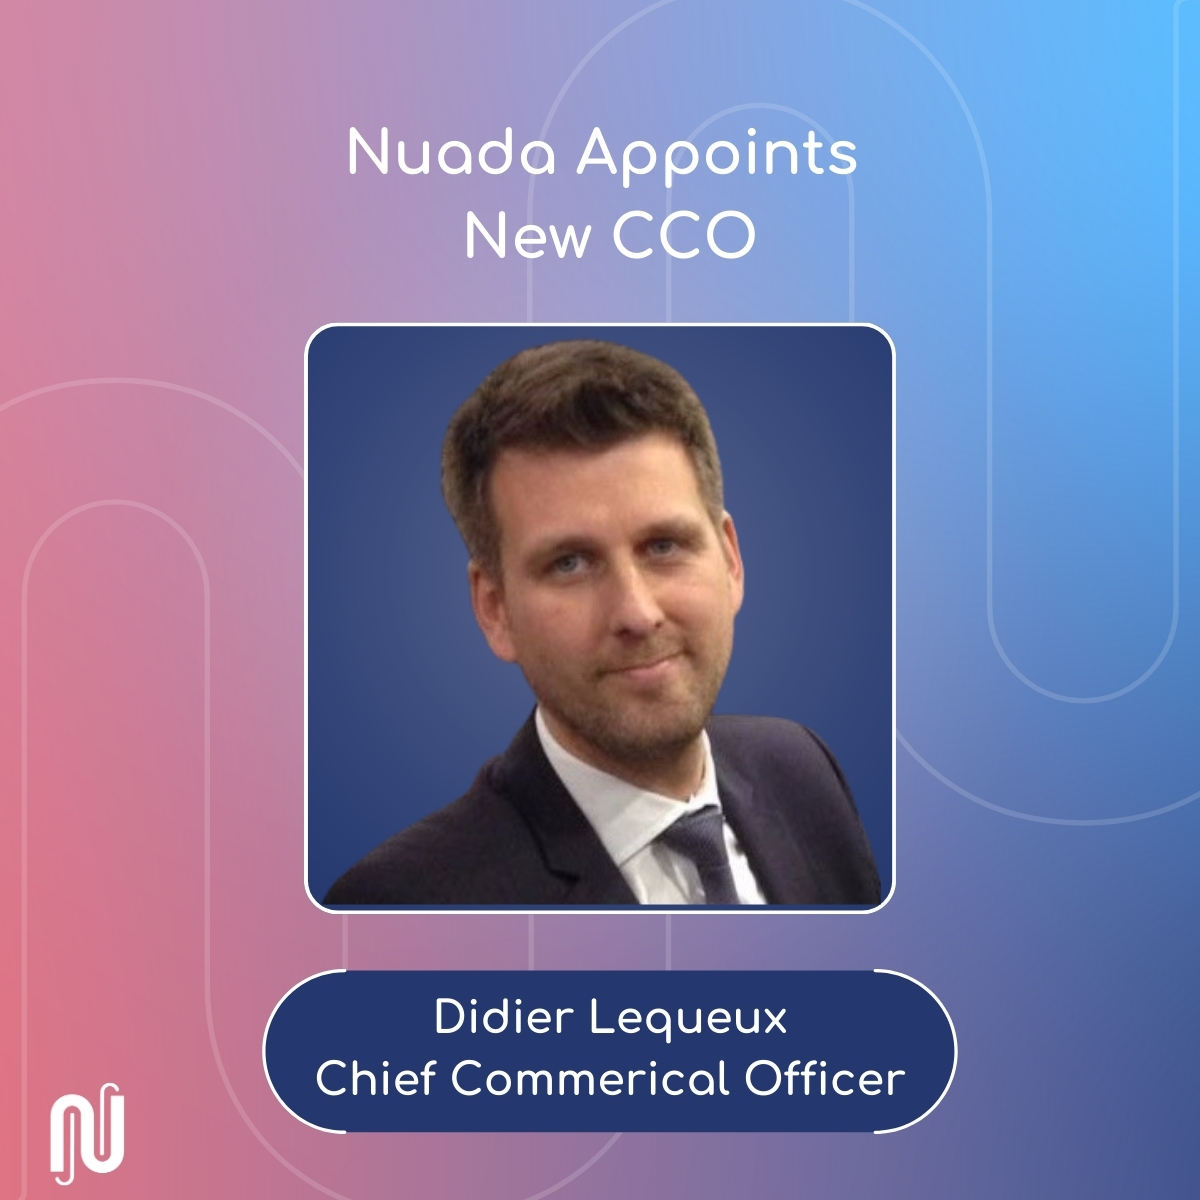 Nuada announces Didier Lequeux as our new Chief Commercial Officer! Didier brings 20+ years of international experience in the energy industry and will be at the helm of the company’s commercial strategy and global business growth. #ccus #carboncapture